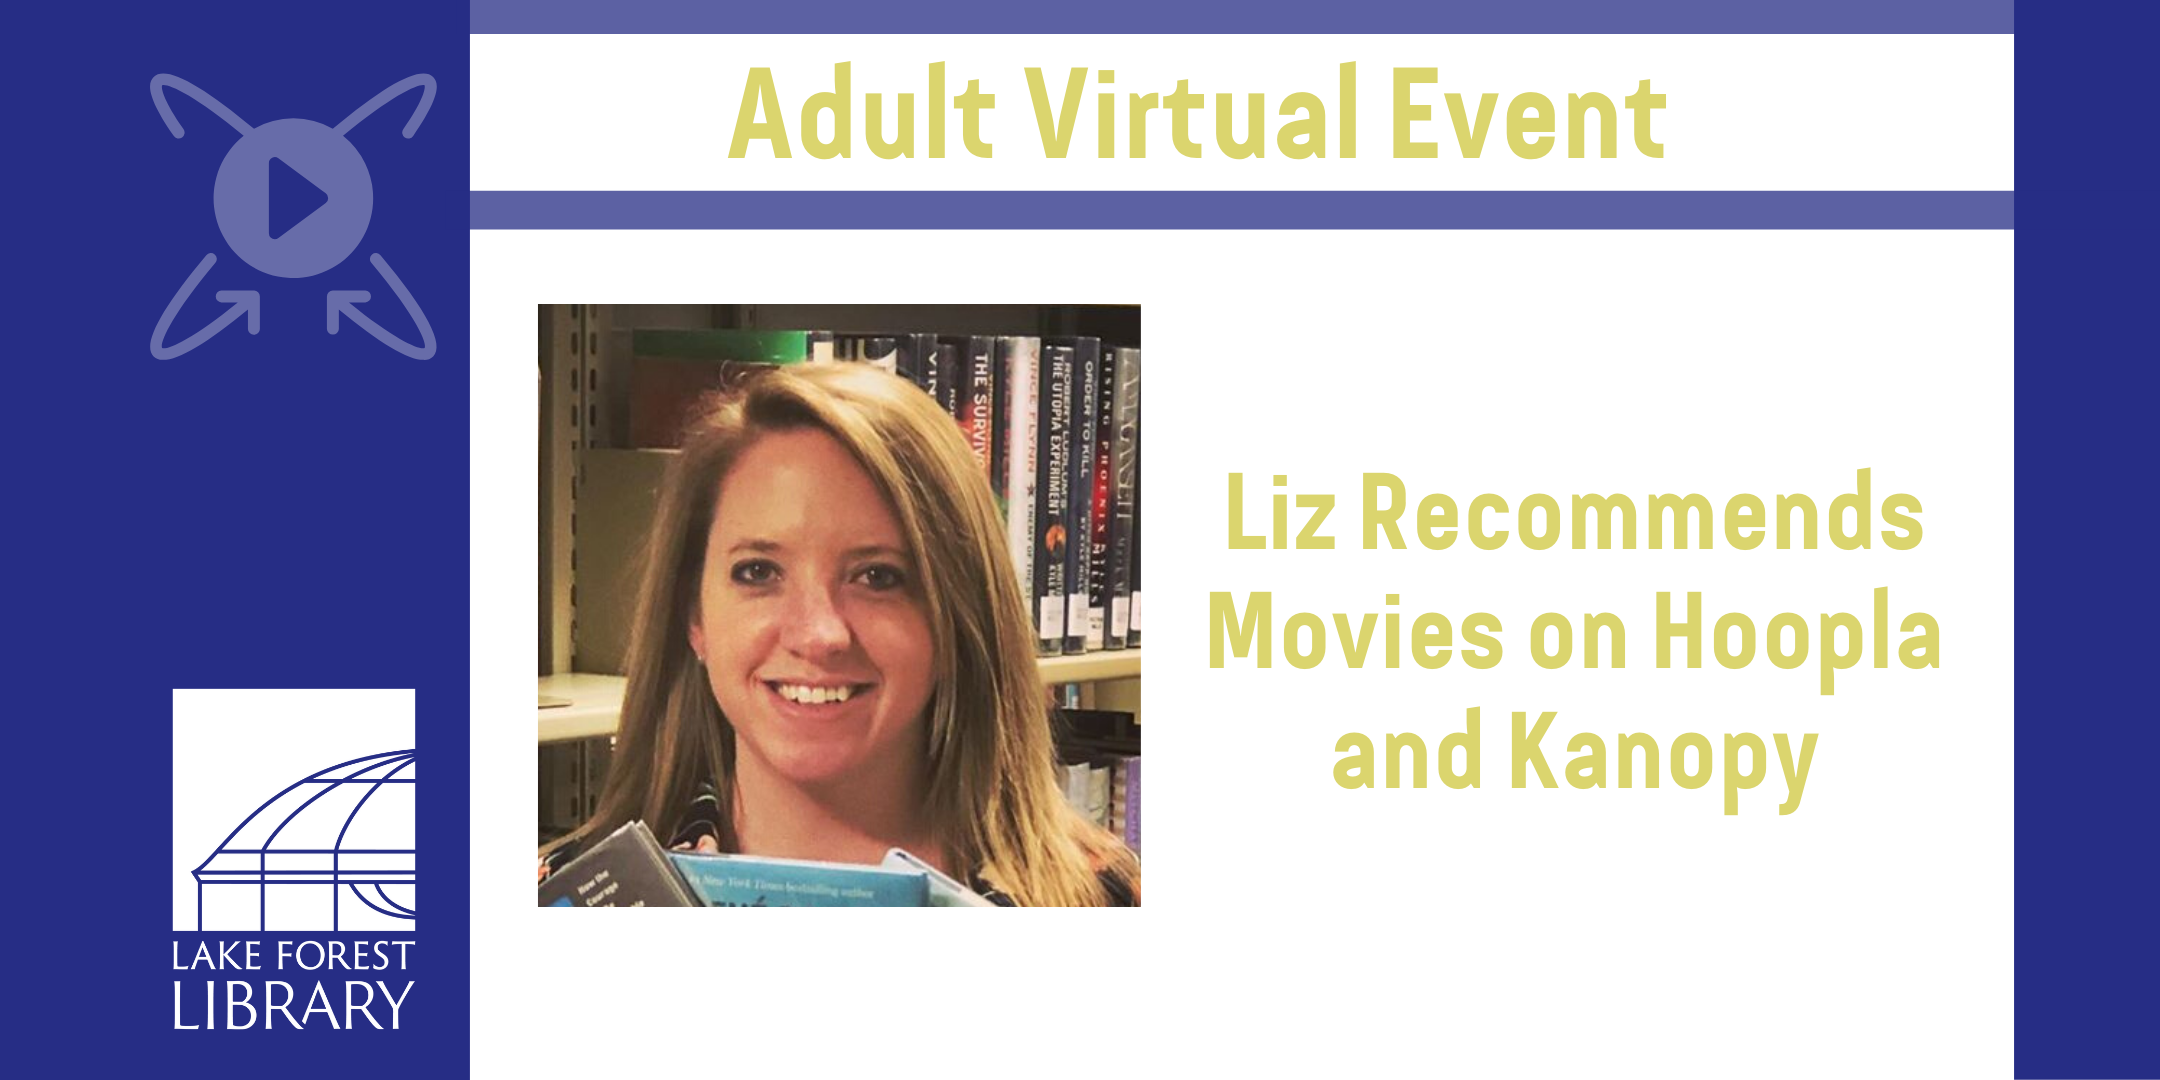 Liz Recommends Movies on Hoopla and Kanopy